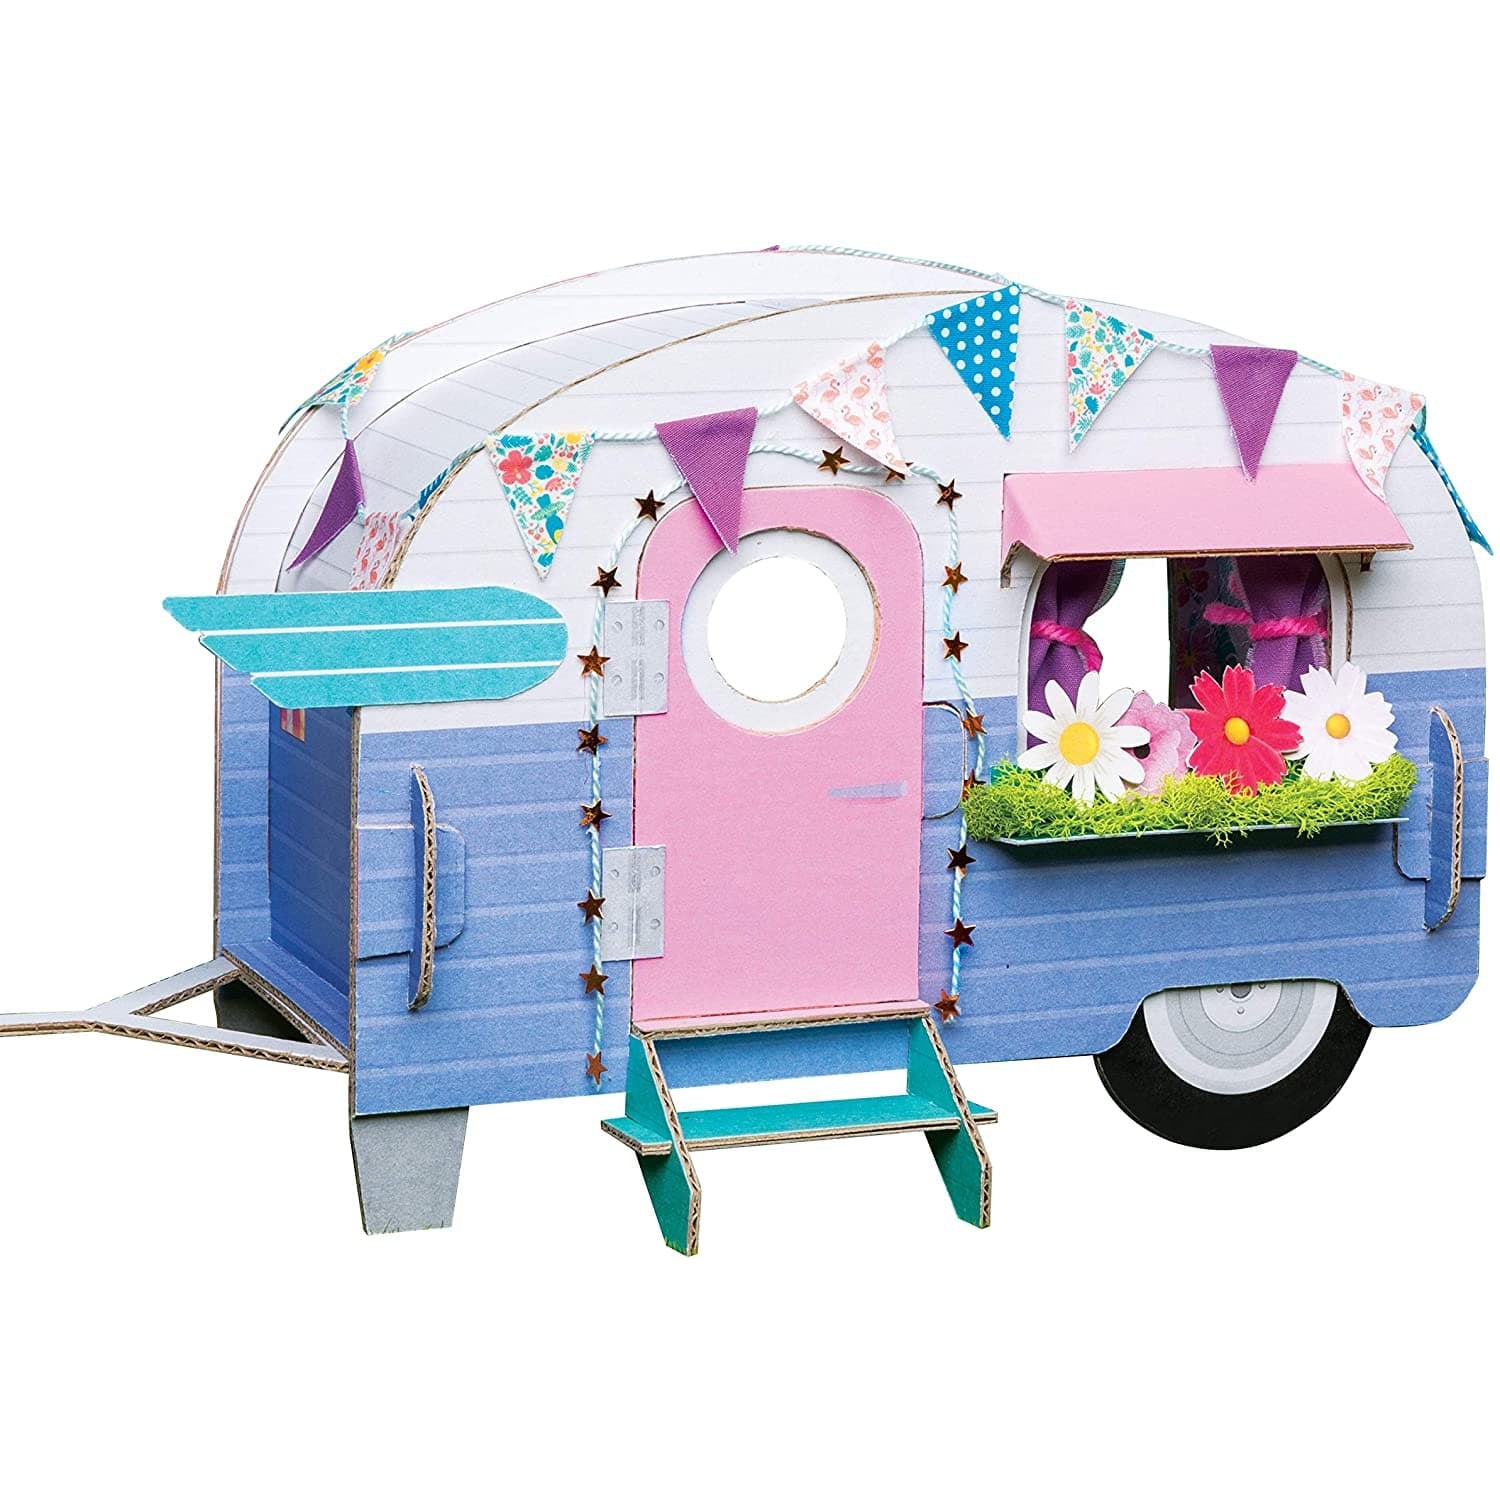 Klutz-Make Your Own Tiny Camper-9781338566185-Legacy Toys